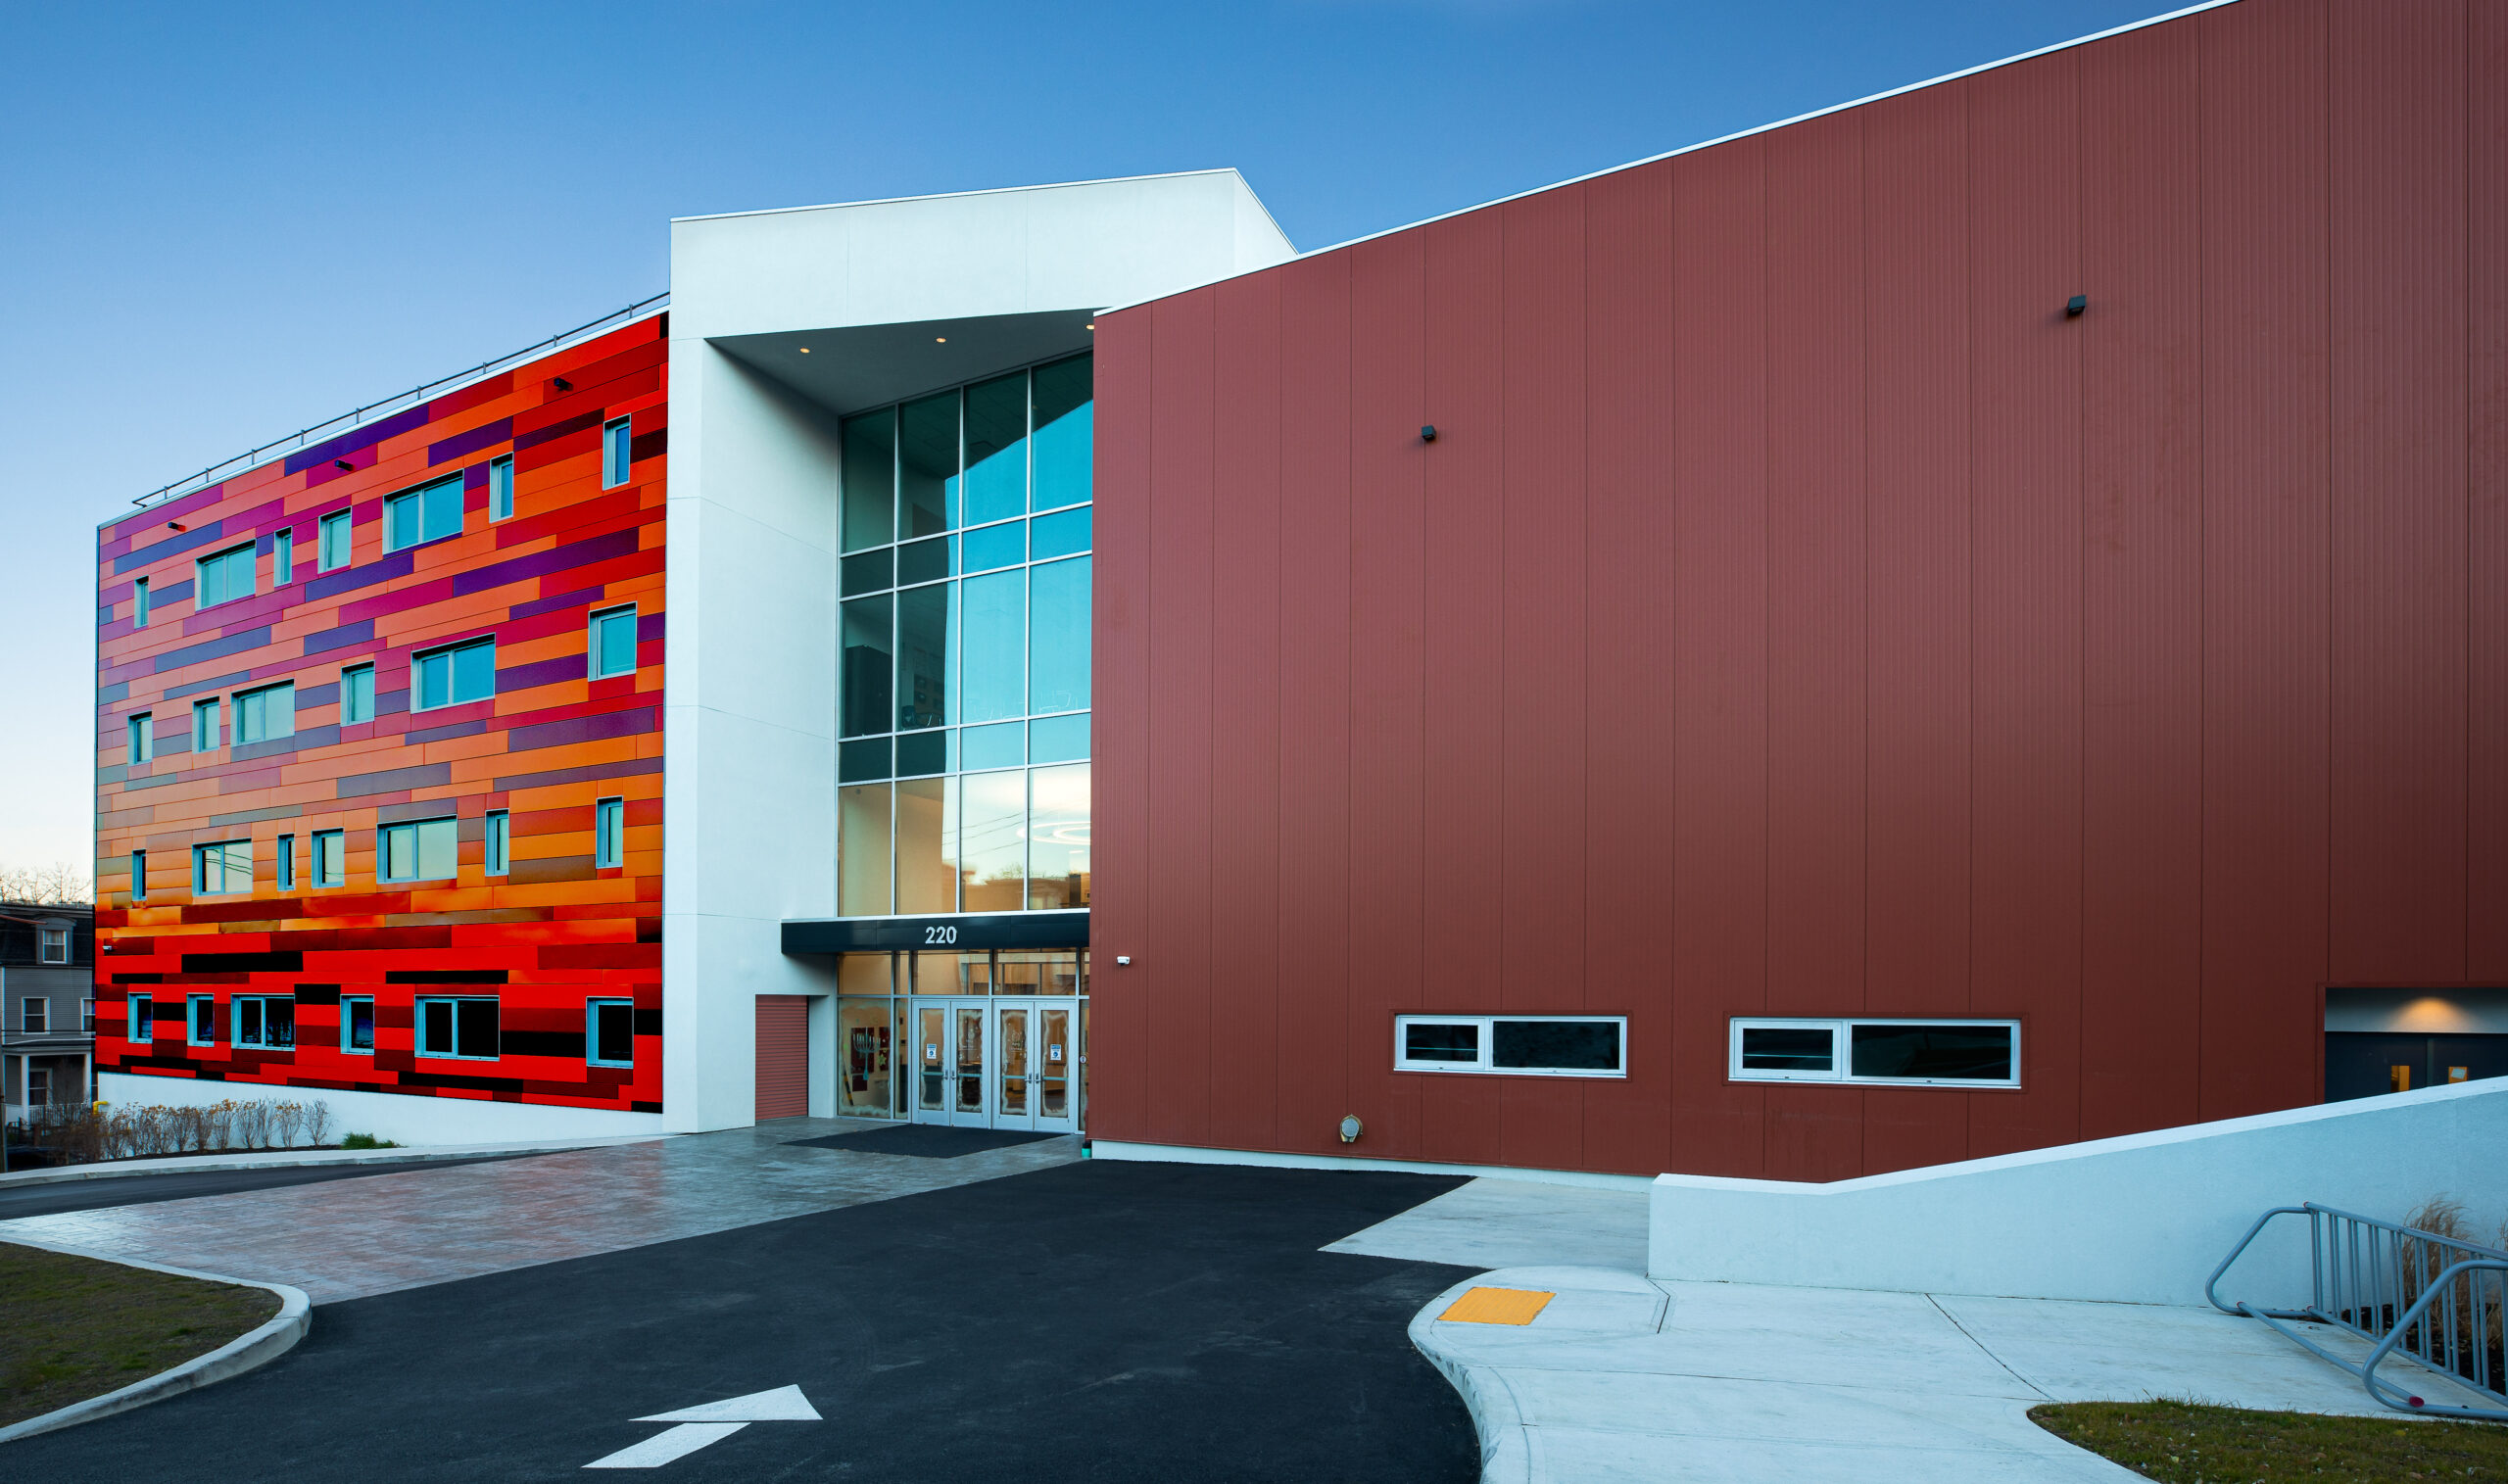 Sisca Organization was general contractor for 90,000 sf Yonkers, NY Charter School building, exterior seen here 